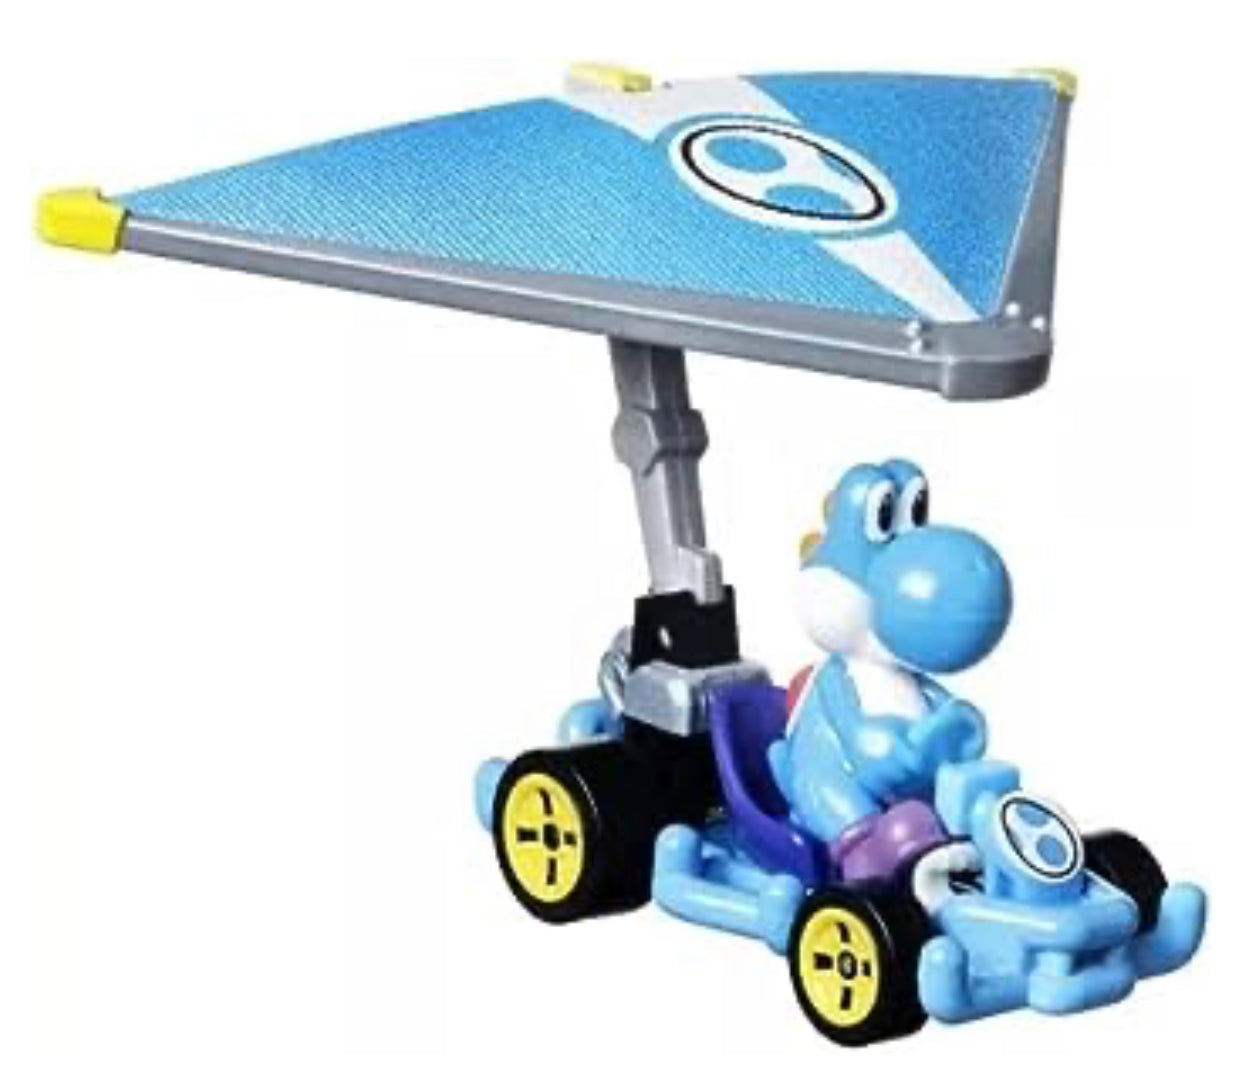 * some box damage* Hot Wheels Mario Kart 1:64 Scale Die-cast Light-Blue Yoshi in Pipe Frame Kart with Super Glider